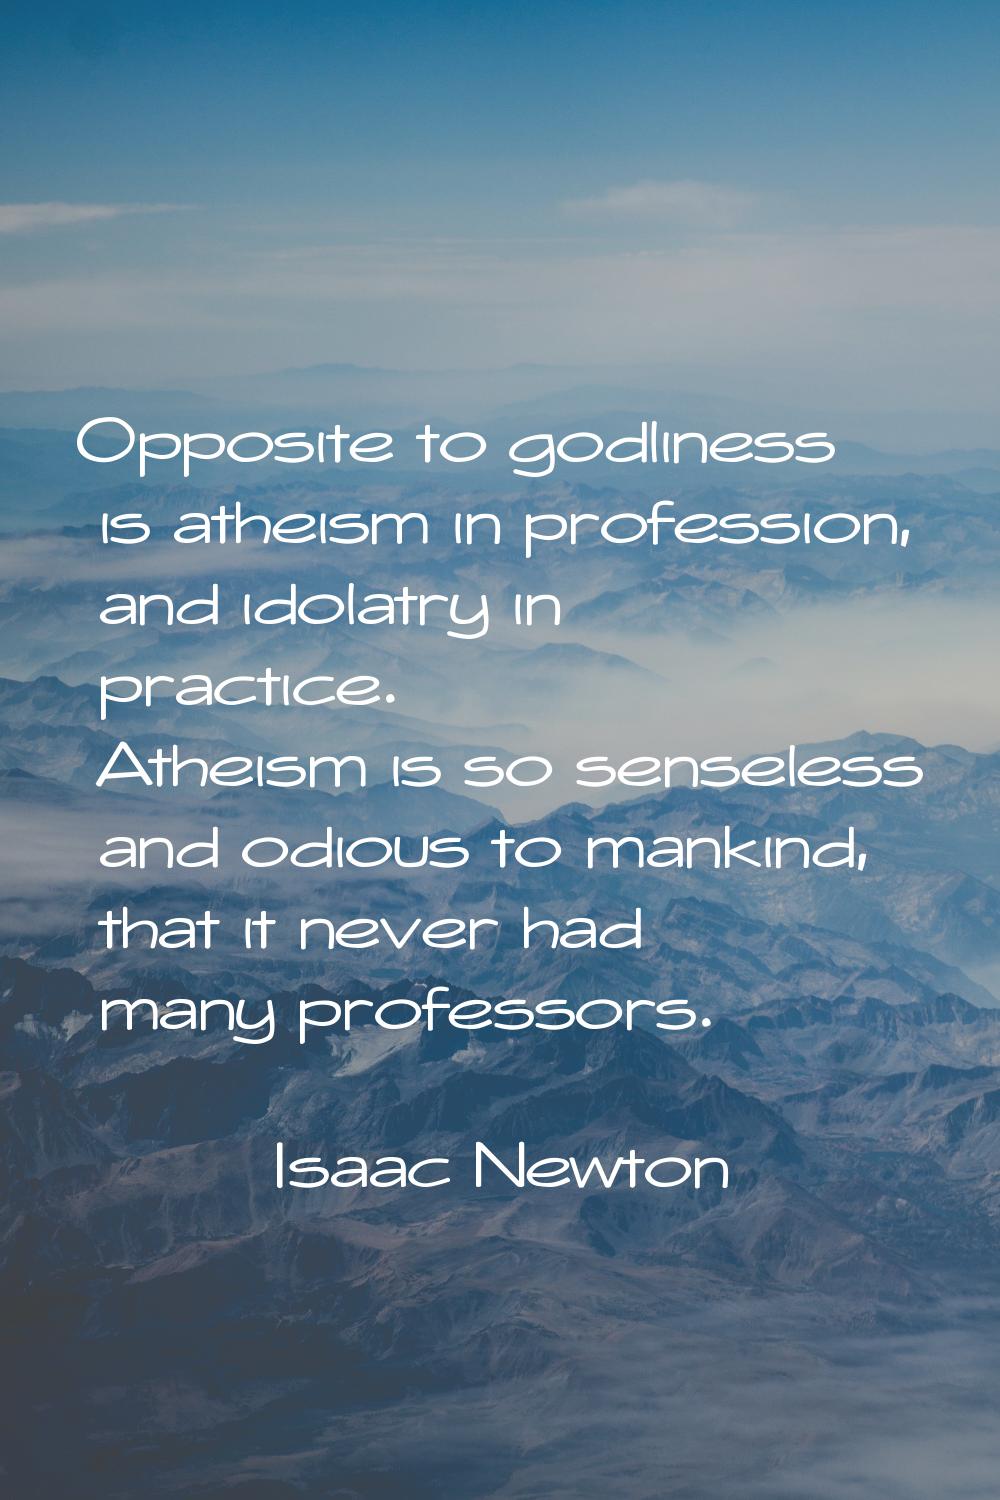 Opposite to godliness is atheism in profession, and idolatry in practice. Atheism is so senseless a